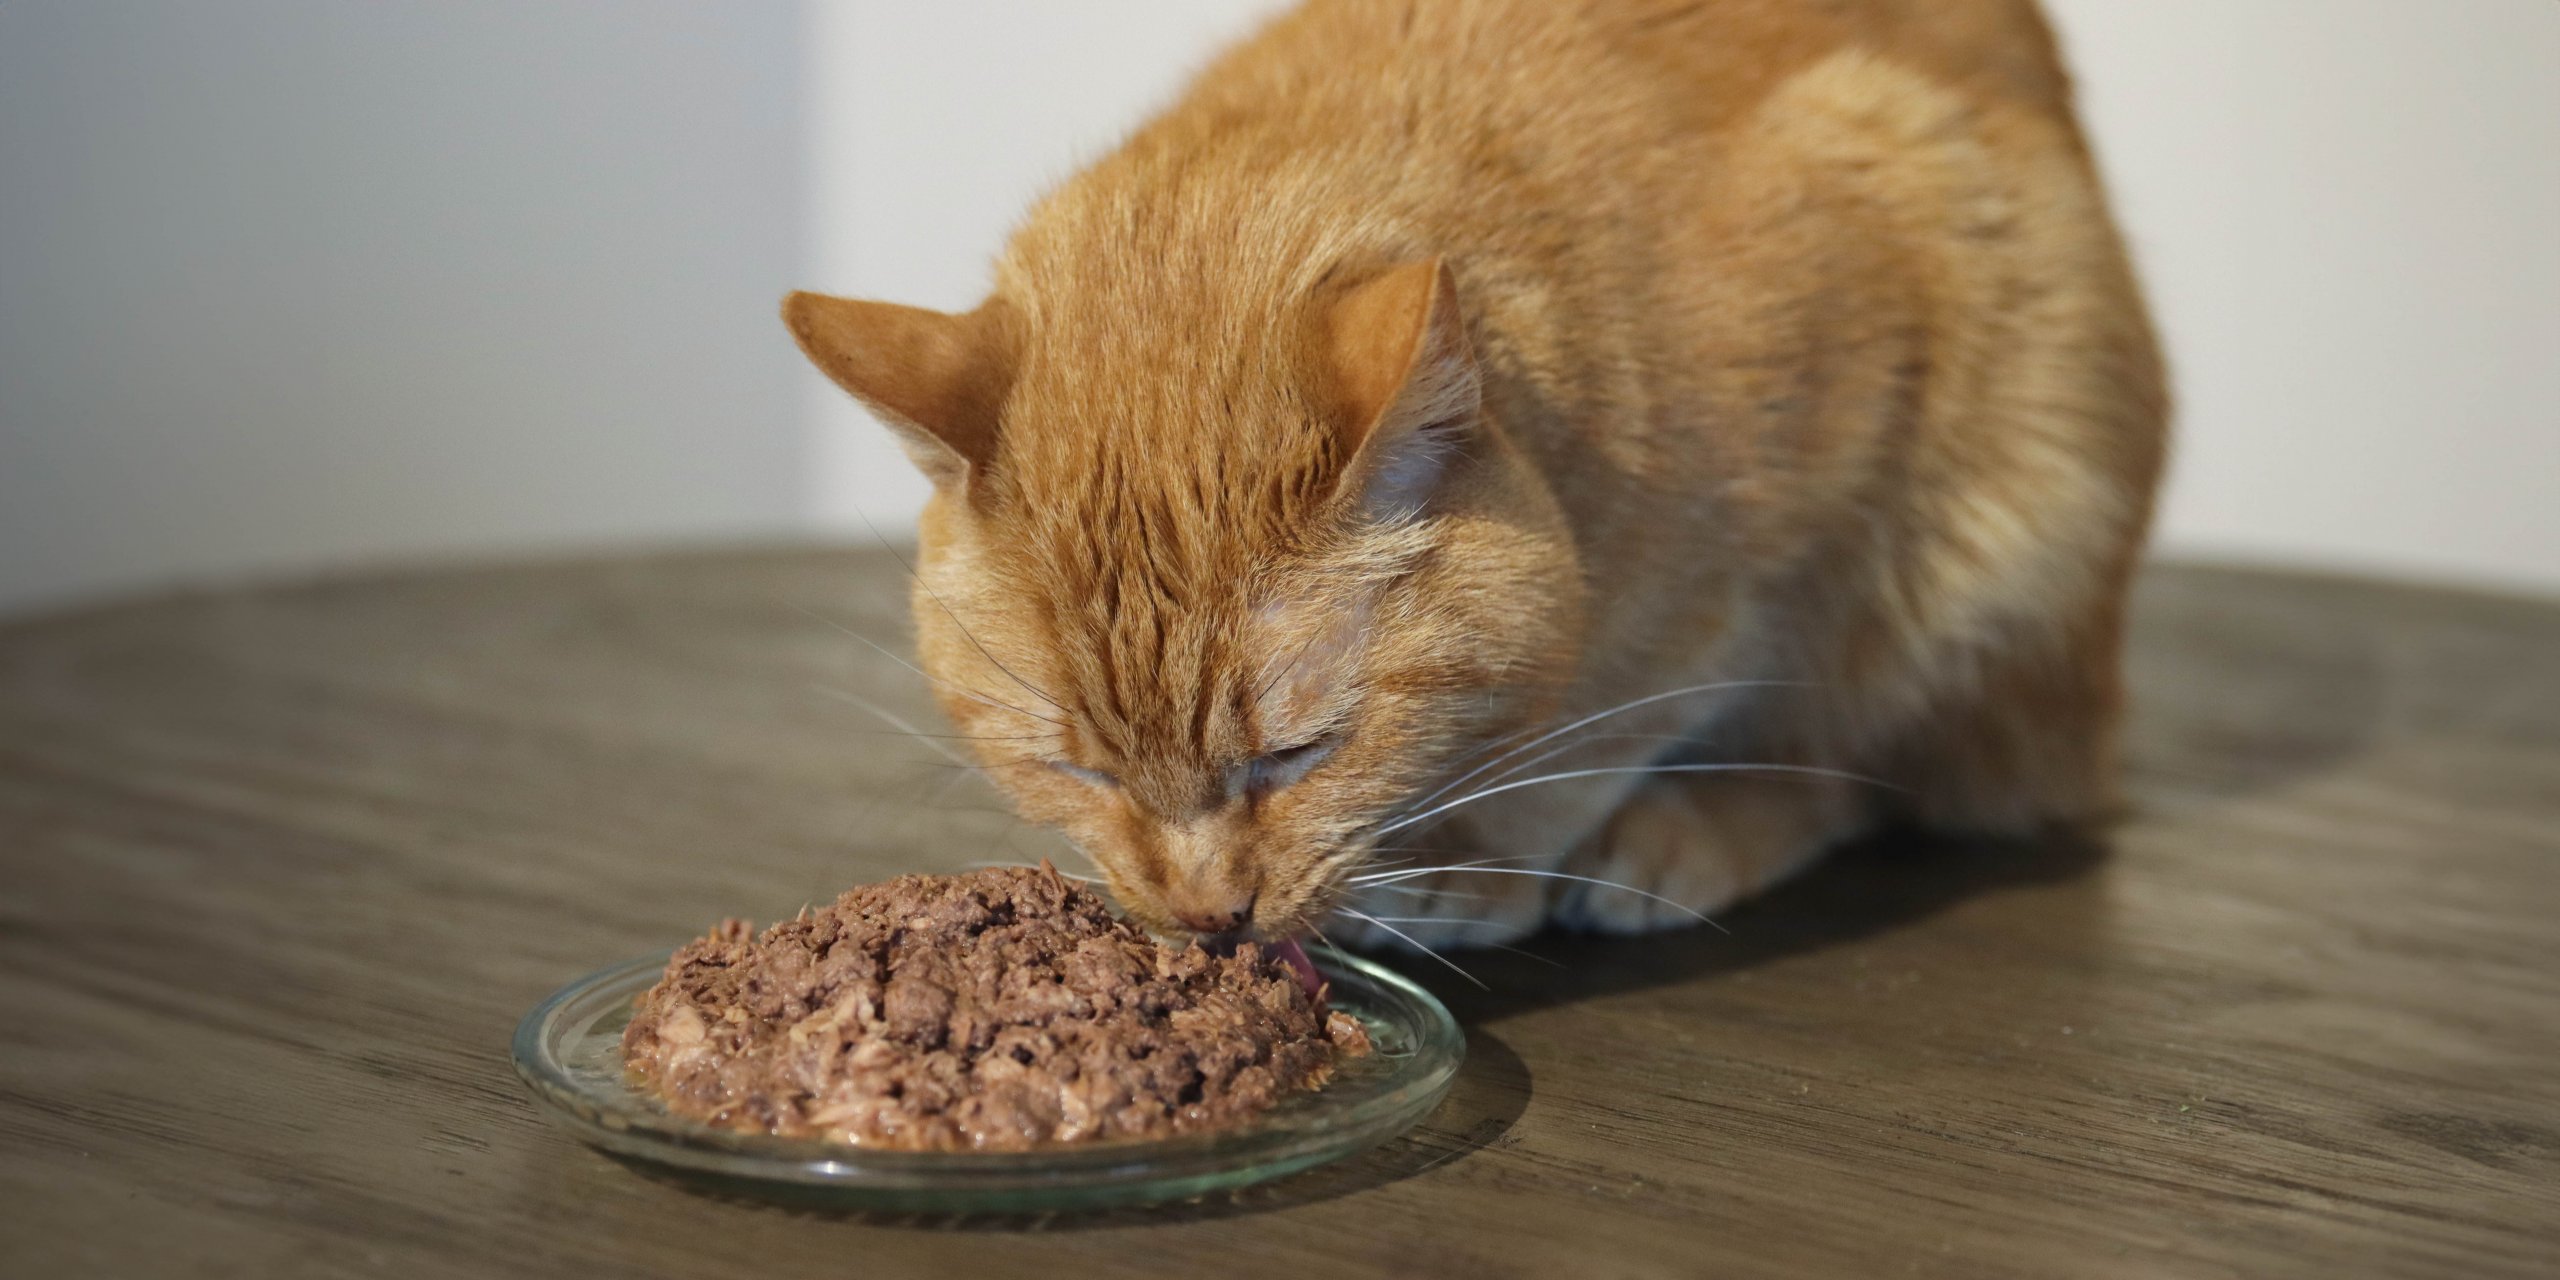 Orange cat eating cat food off a plate on a wooden table.